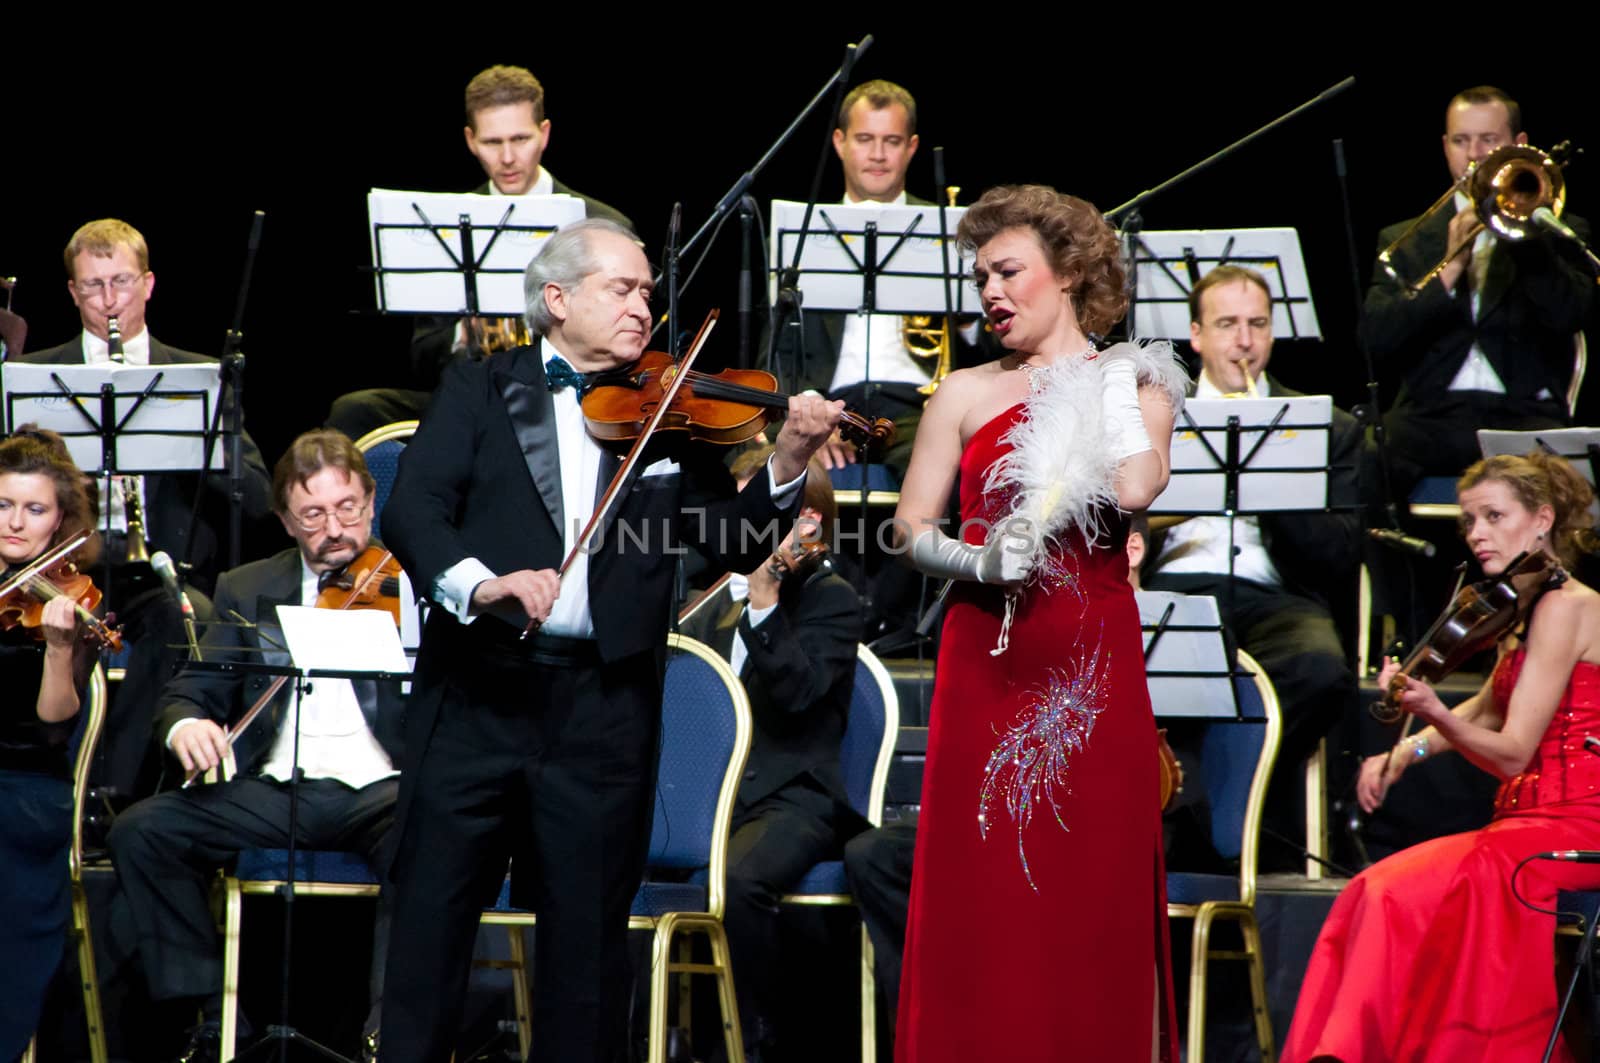 Conductor Peter Guth, singer Monica Mosser and Strauss Festival Orchestra Vienna in concert Crocus City Hall. 
Moscow - November 17, 2010